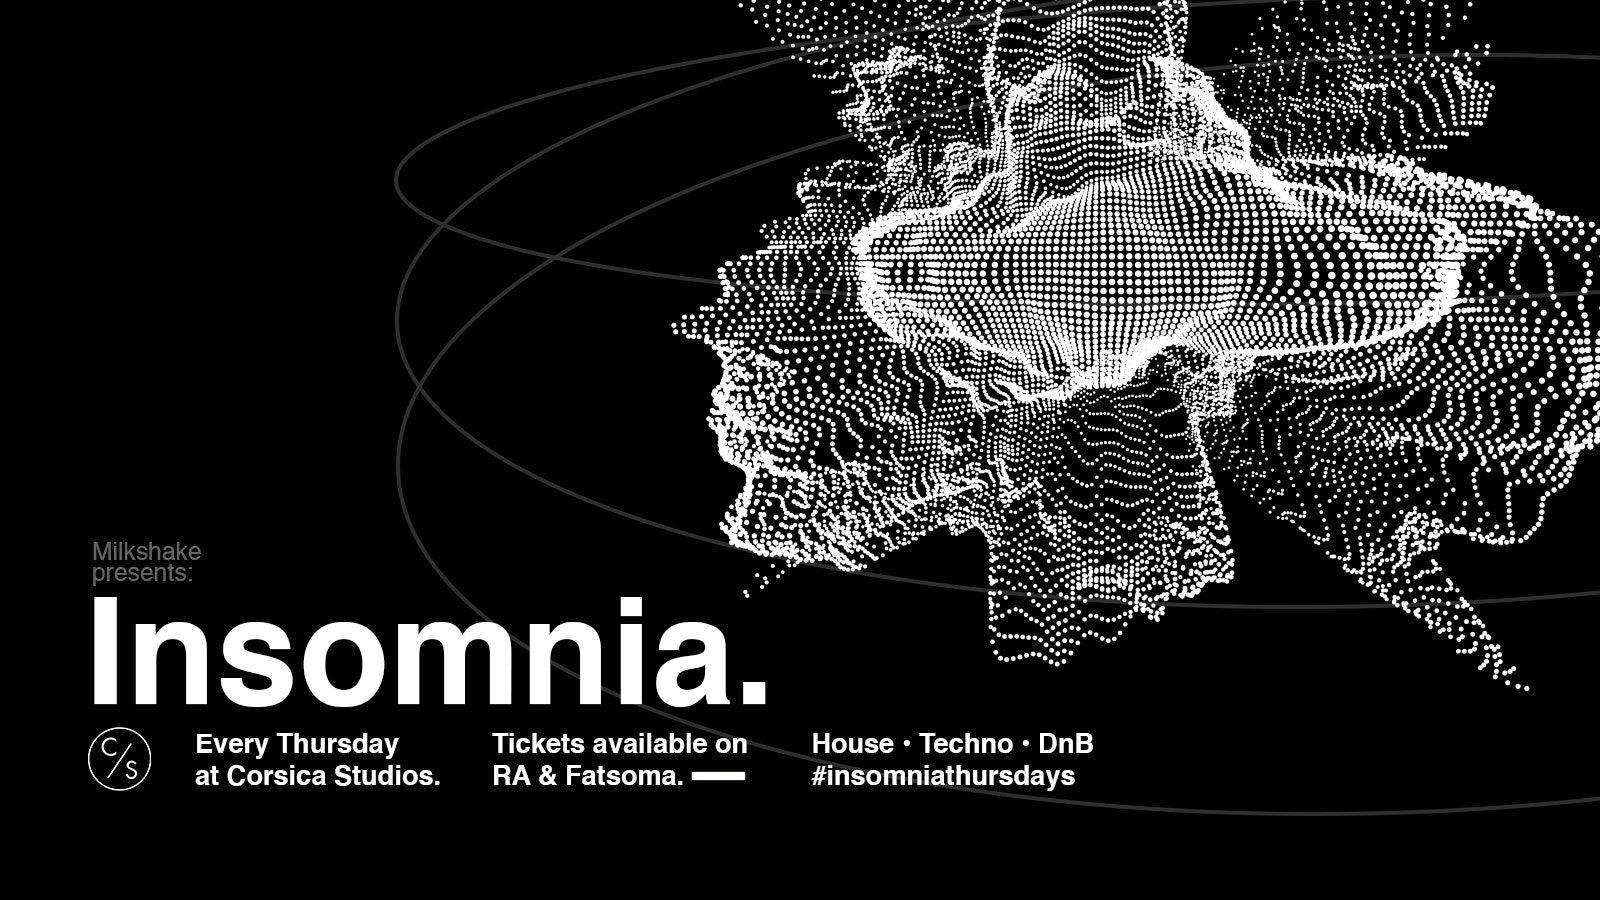 Insomnia London | House, Techno, DnB – £3 Tickets on sale now!